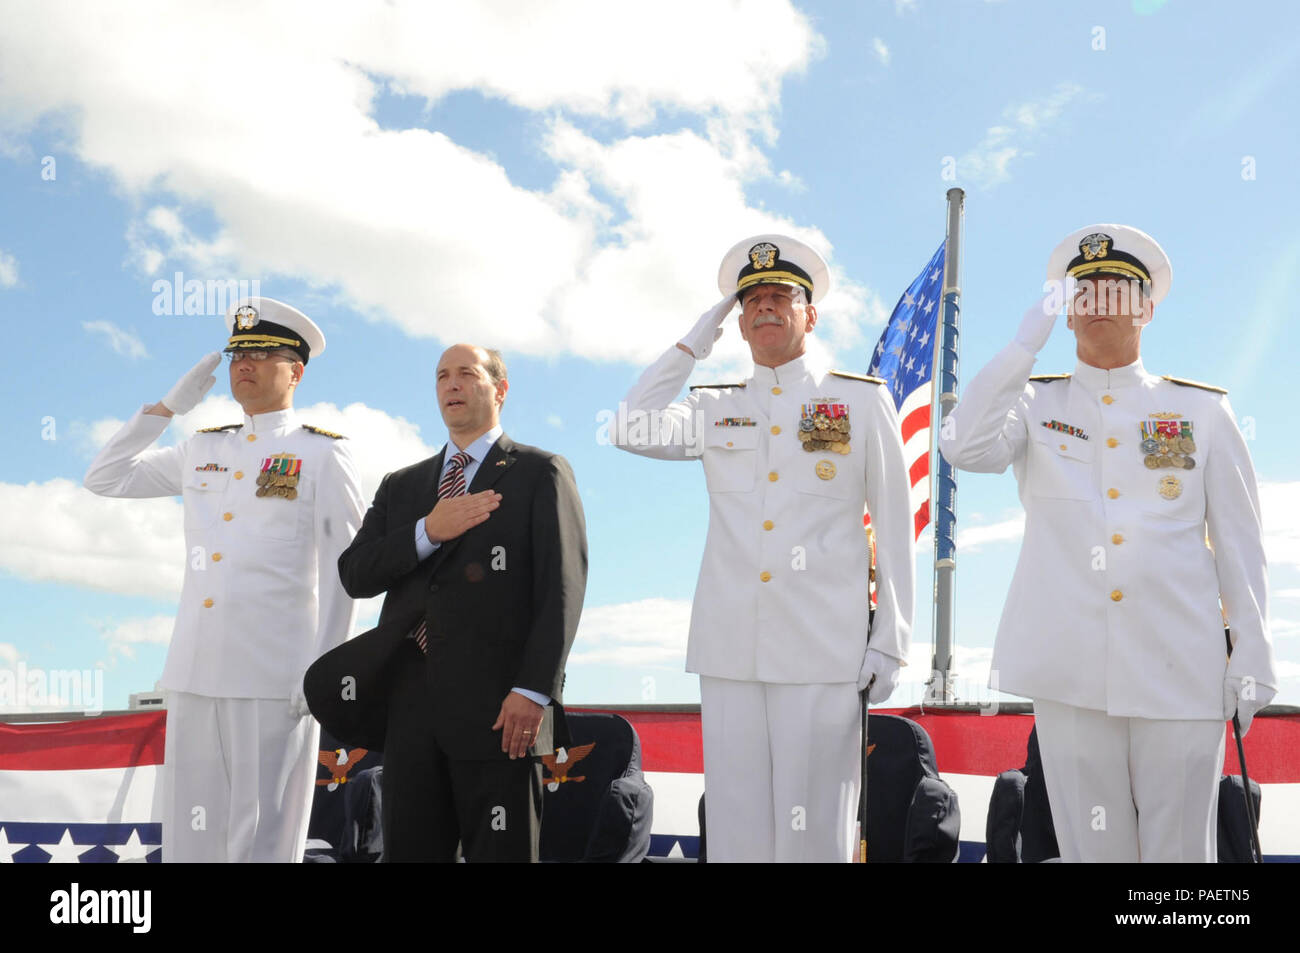 CAIRNS, Australia (July 31, 2013) Vice Adm. Robert L. Thomas Jr., right, salutes after taking command of the U.S. 7th Fleet alongside departing 7th Fleet Commander Vice Adm. Scott H. Swift, Jeffrey Bleich, U.S. Ambassador to Australia and Capt. John Shimotsu, 7th Fleet Chaplain, during a change of command ceremony on board the flagship USS Blue Ridge (LCC 19) in Cairns, Australia. Blue Ridge and embarked 7th Fleet staff are currently on patrol operating forward, building maritime partnerships and conducting security and stability operations. Stock Photo